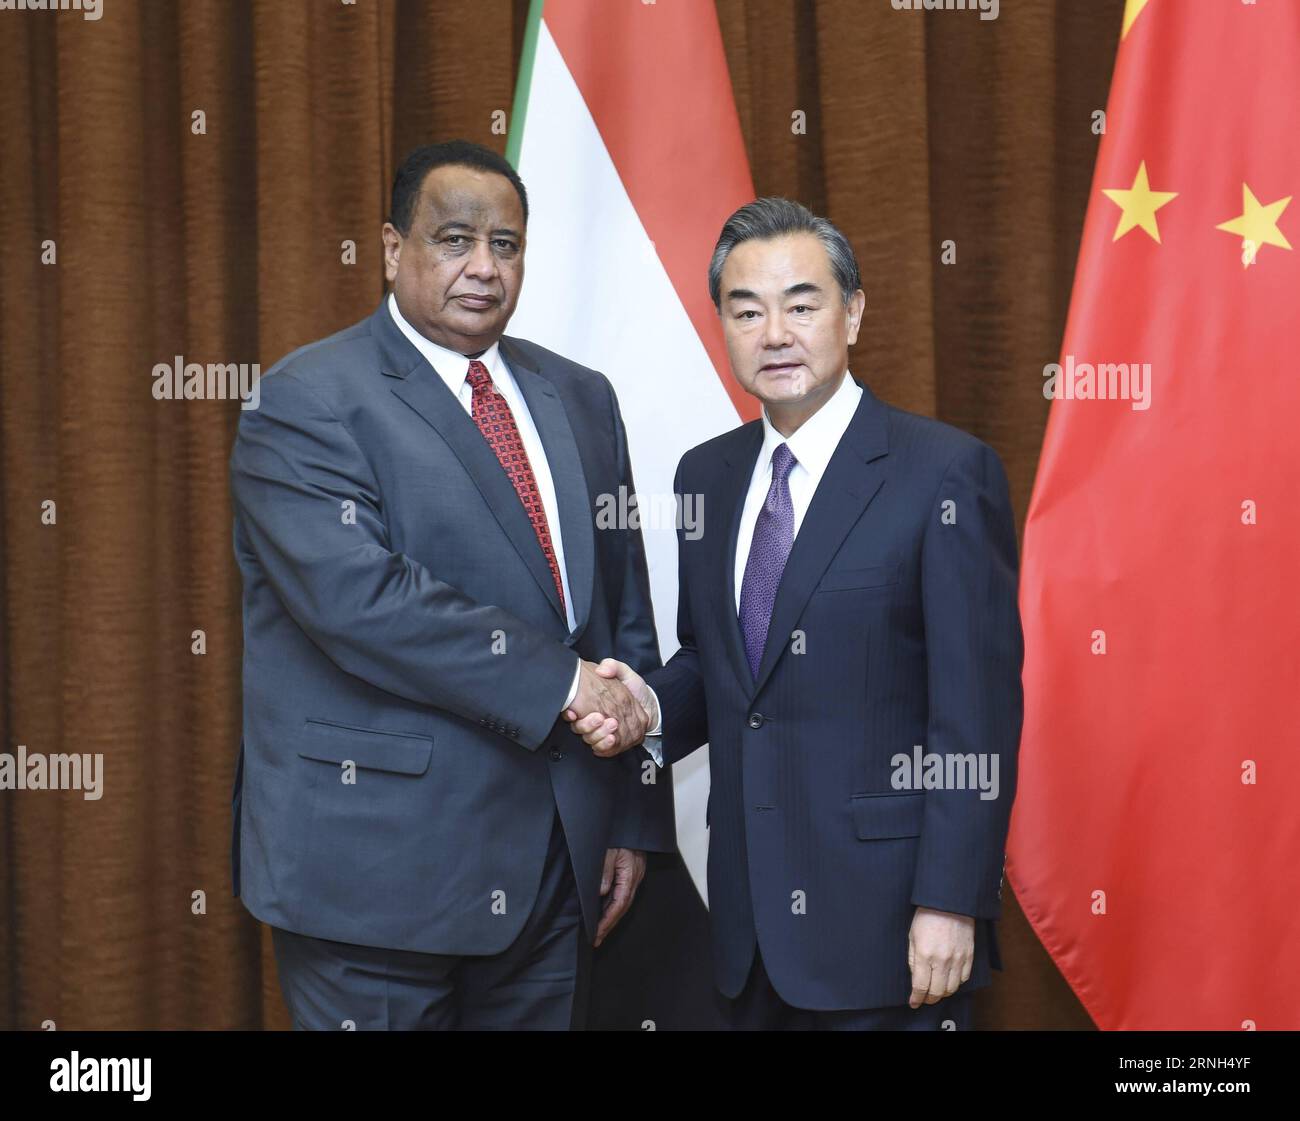 Chinese Foreign Minister Wang Yi (R) holds talks with Sudan s Foreign Minister Ibrahim Ghandour in Beijing, capital of China, Oct. 28, 2016. ) (zhs) CHINA-SUDAN-TALKS (CN) ZhangxLing PUBLICATIONxNOTxINxCHN   Chinese Foreign Ministers Wang Yi r holds Talks With Sudan S Foreign Ministers Ibrahim Ghandour in Beijing Capital of China OCT 28 2016 zhs China Sudan Talks CN ZhangxLing PUBLICATIONxNOTxINxCHN Stock Photo